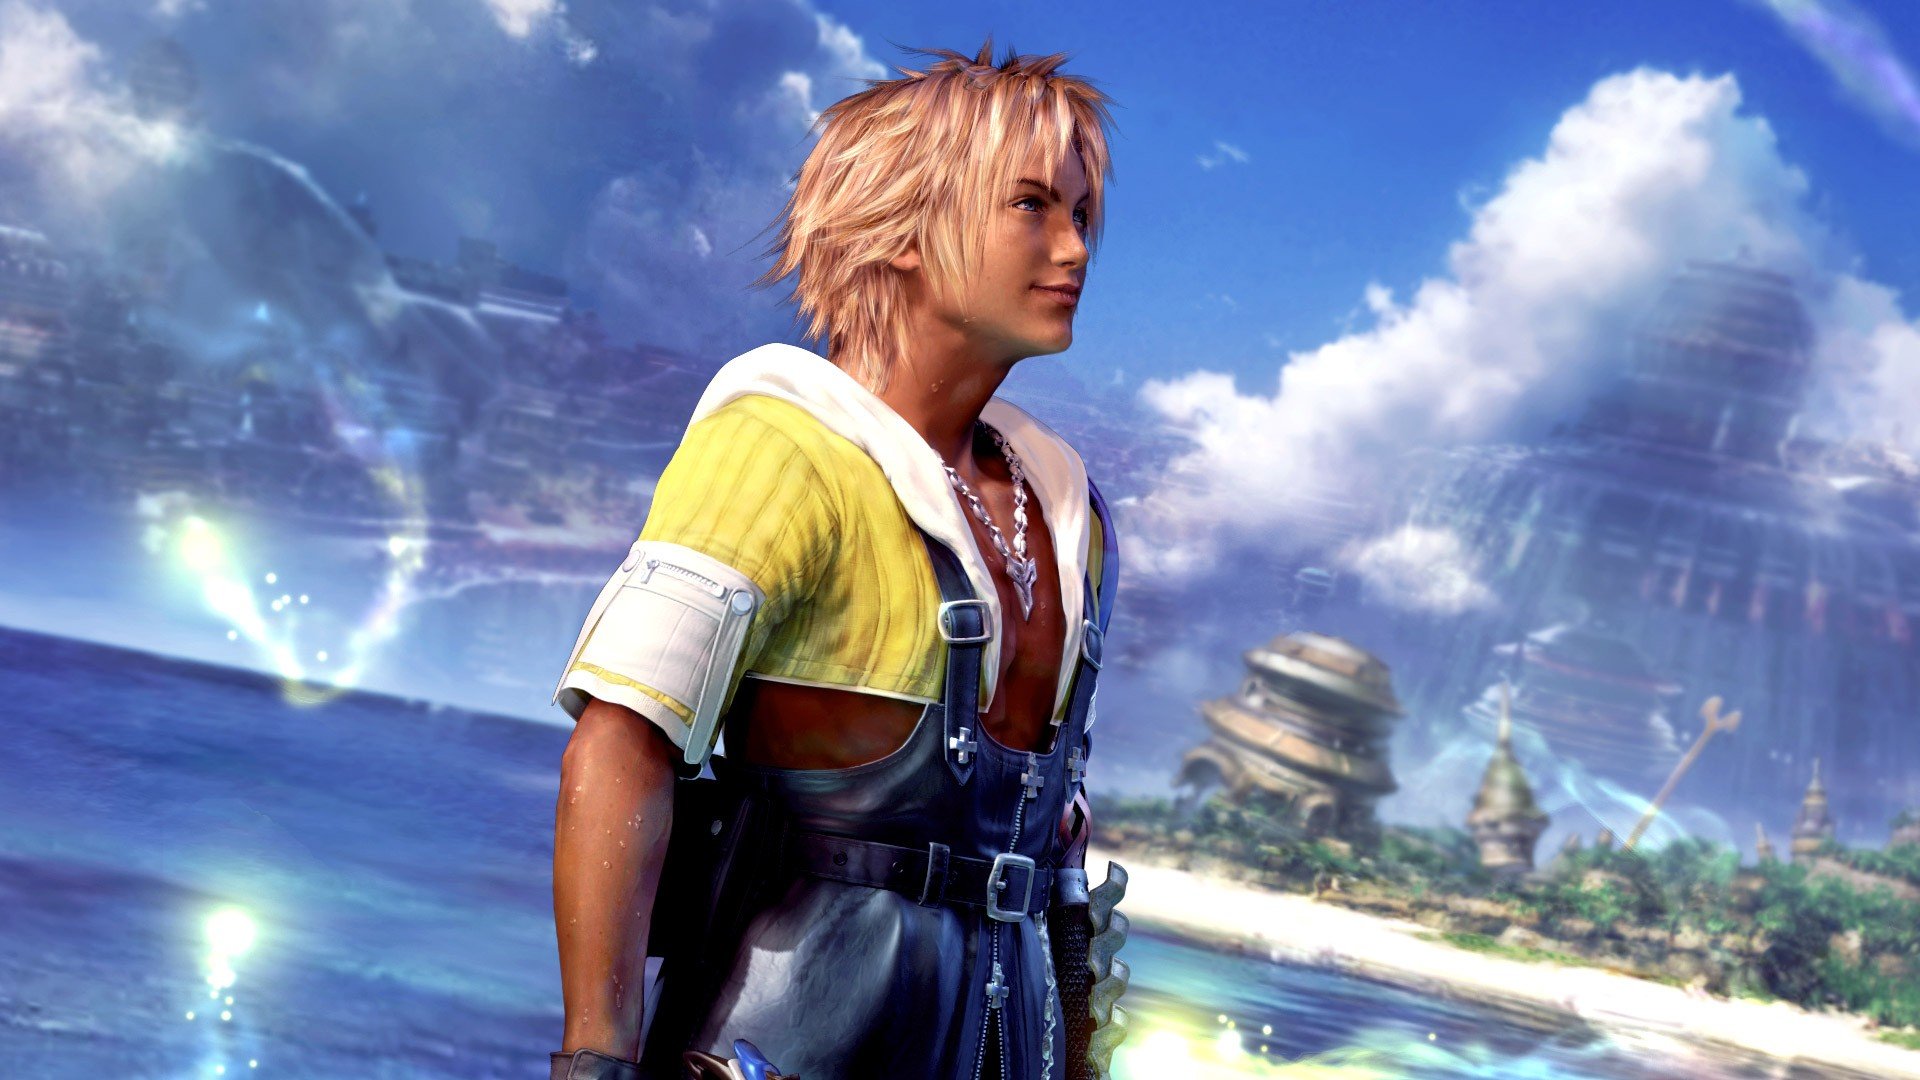 tidus, Final Fantasy X Wallpapers HD / Desktop and Mobile Backgrounds